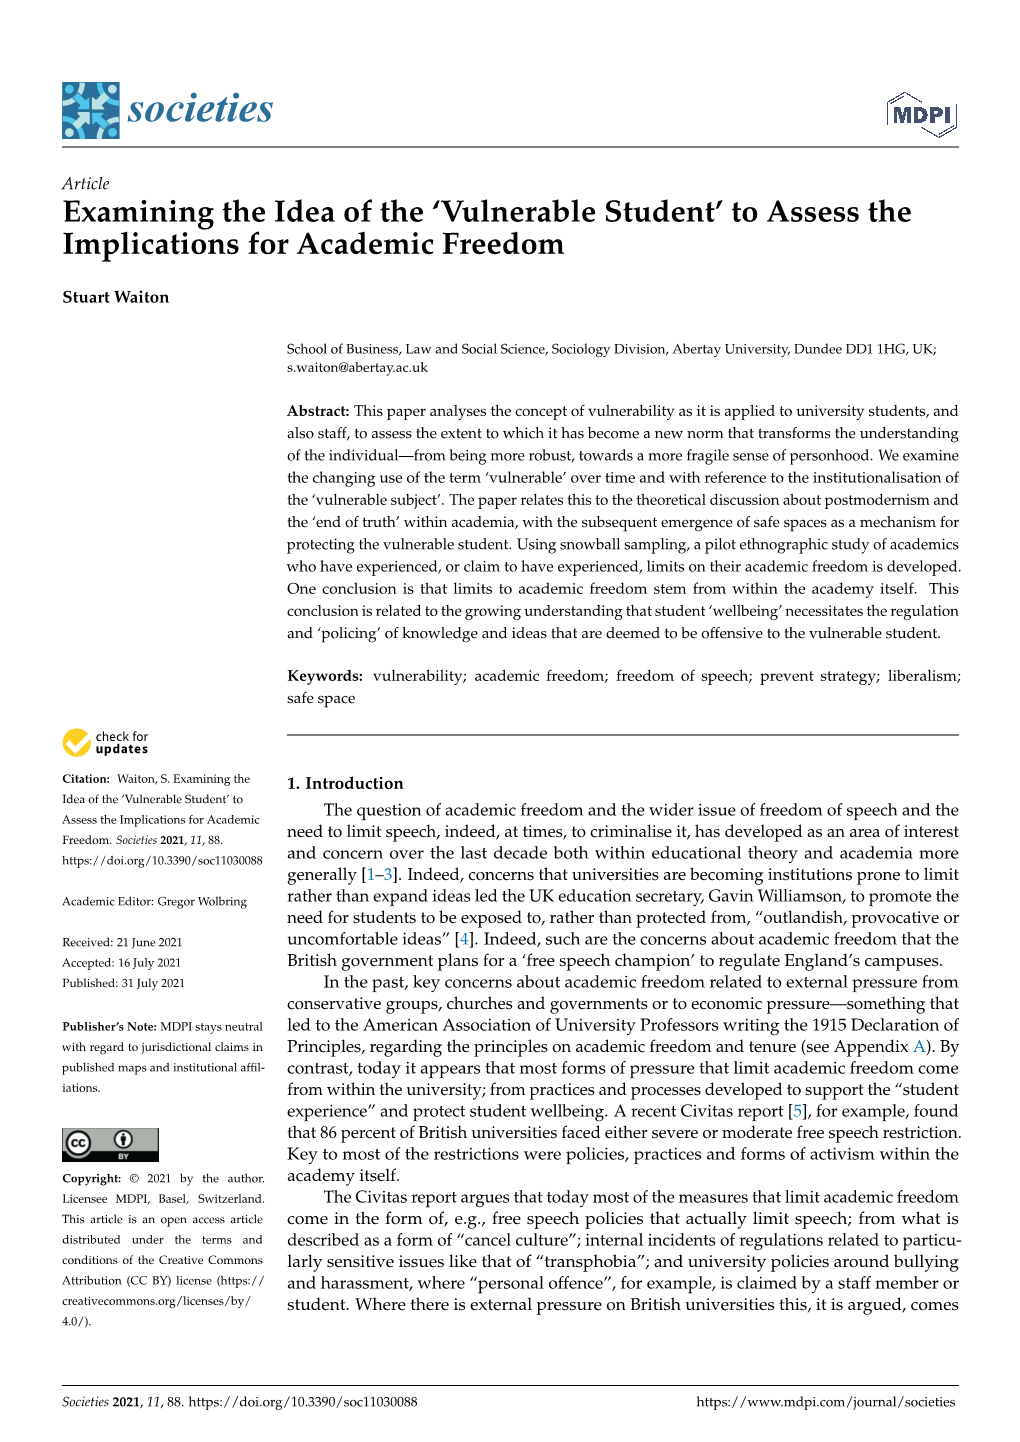 'Vulnerable Student' to Assess the Implications for Academic Freedom